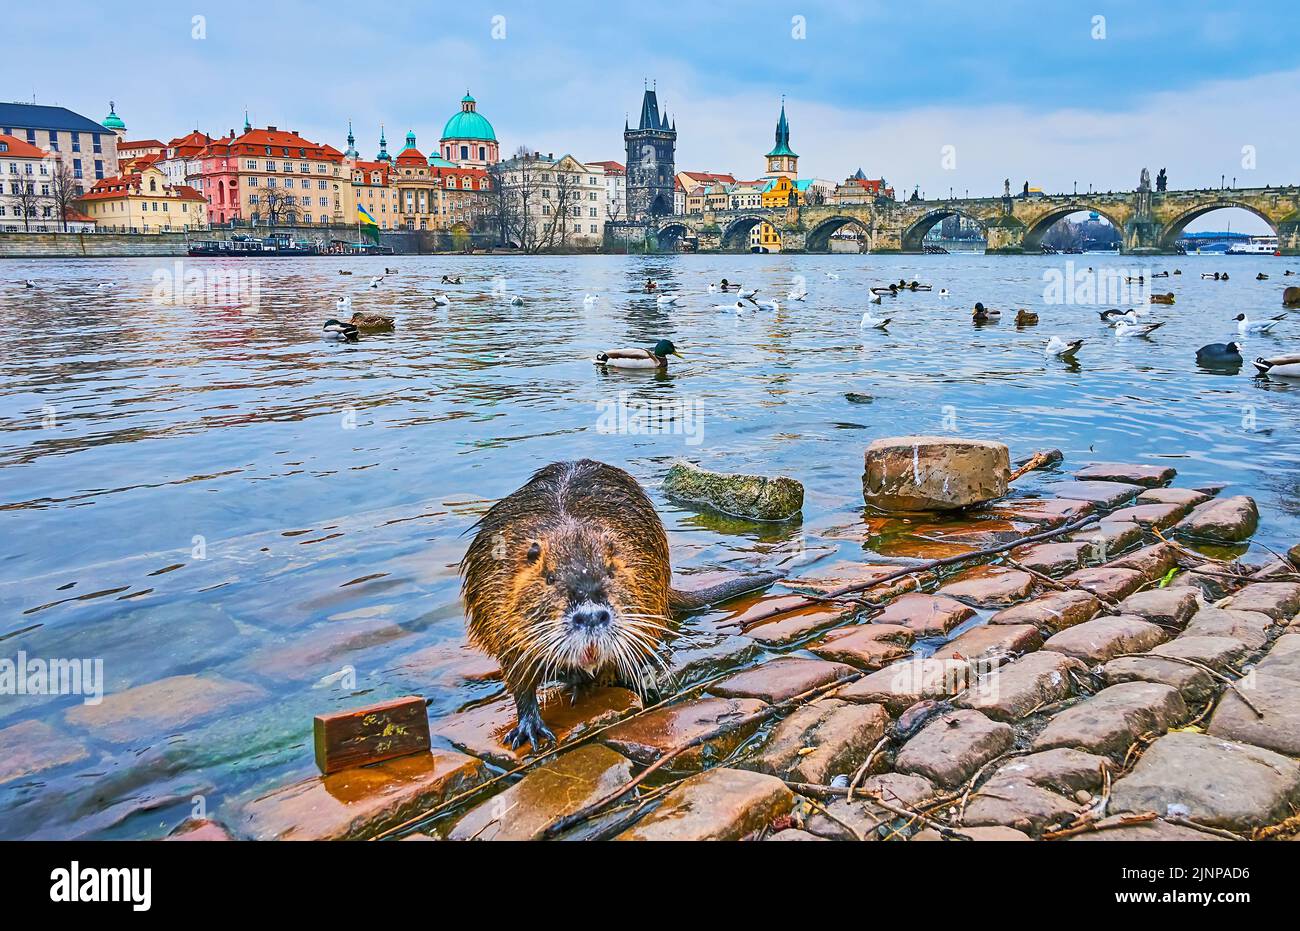 The beautiful big beaver walks the cobblestone on the bank of Vltava River with historic cityscape and Charles Bridge in background, Prague, Czech Rep Stock Photo